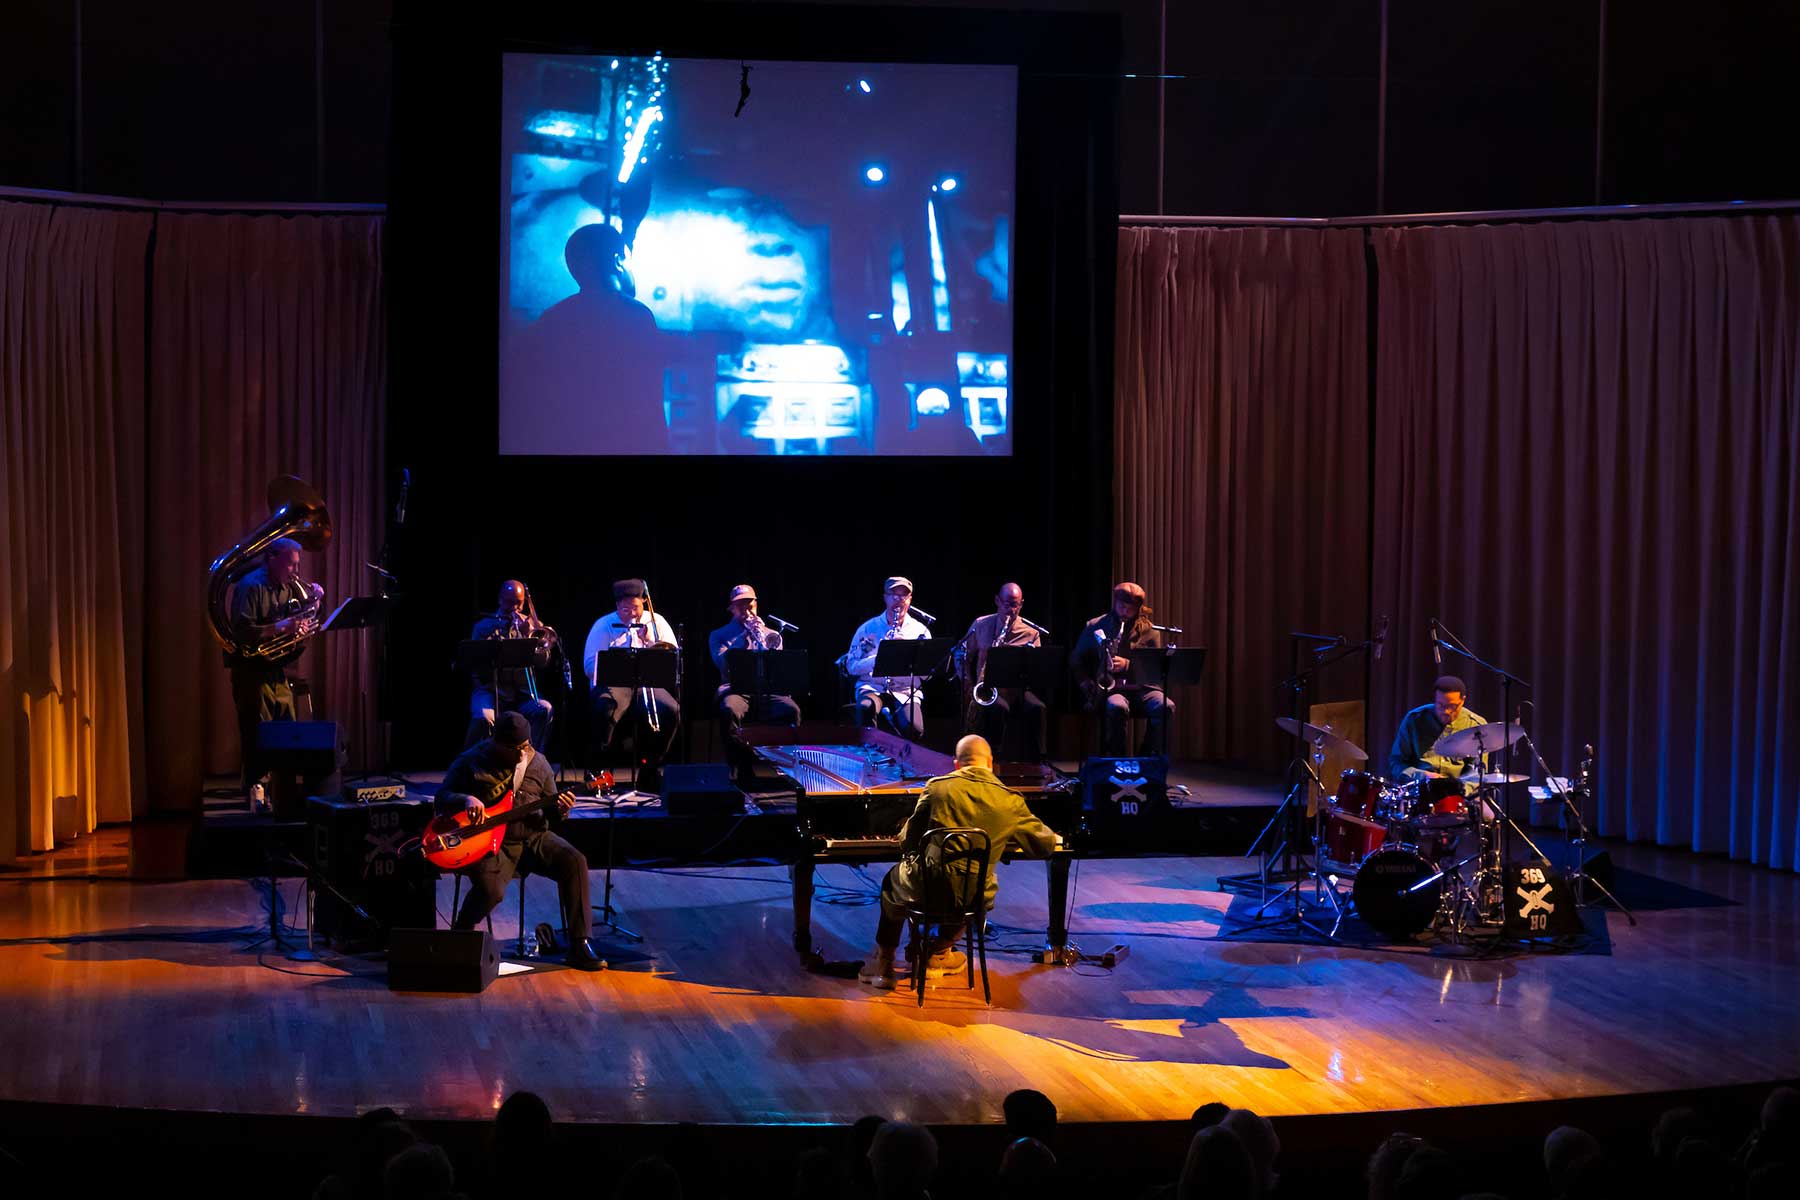 10 musicians playing piano, drums, wind and string instruments on stage.